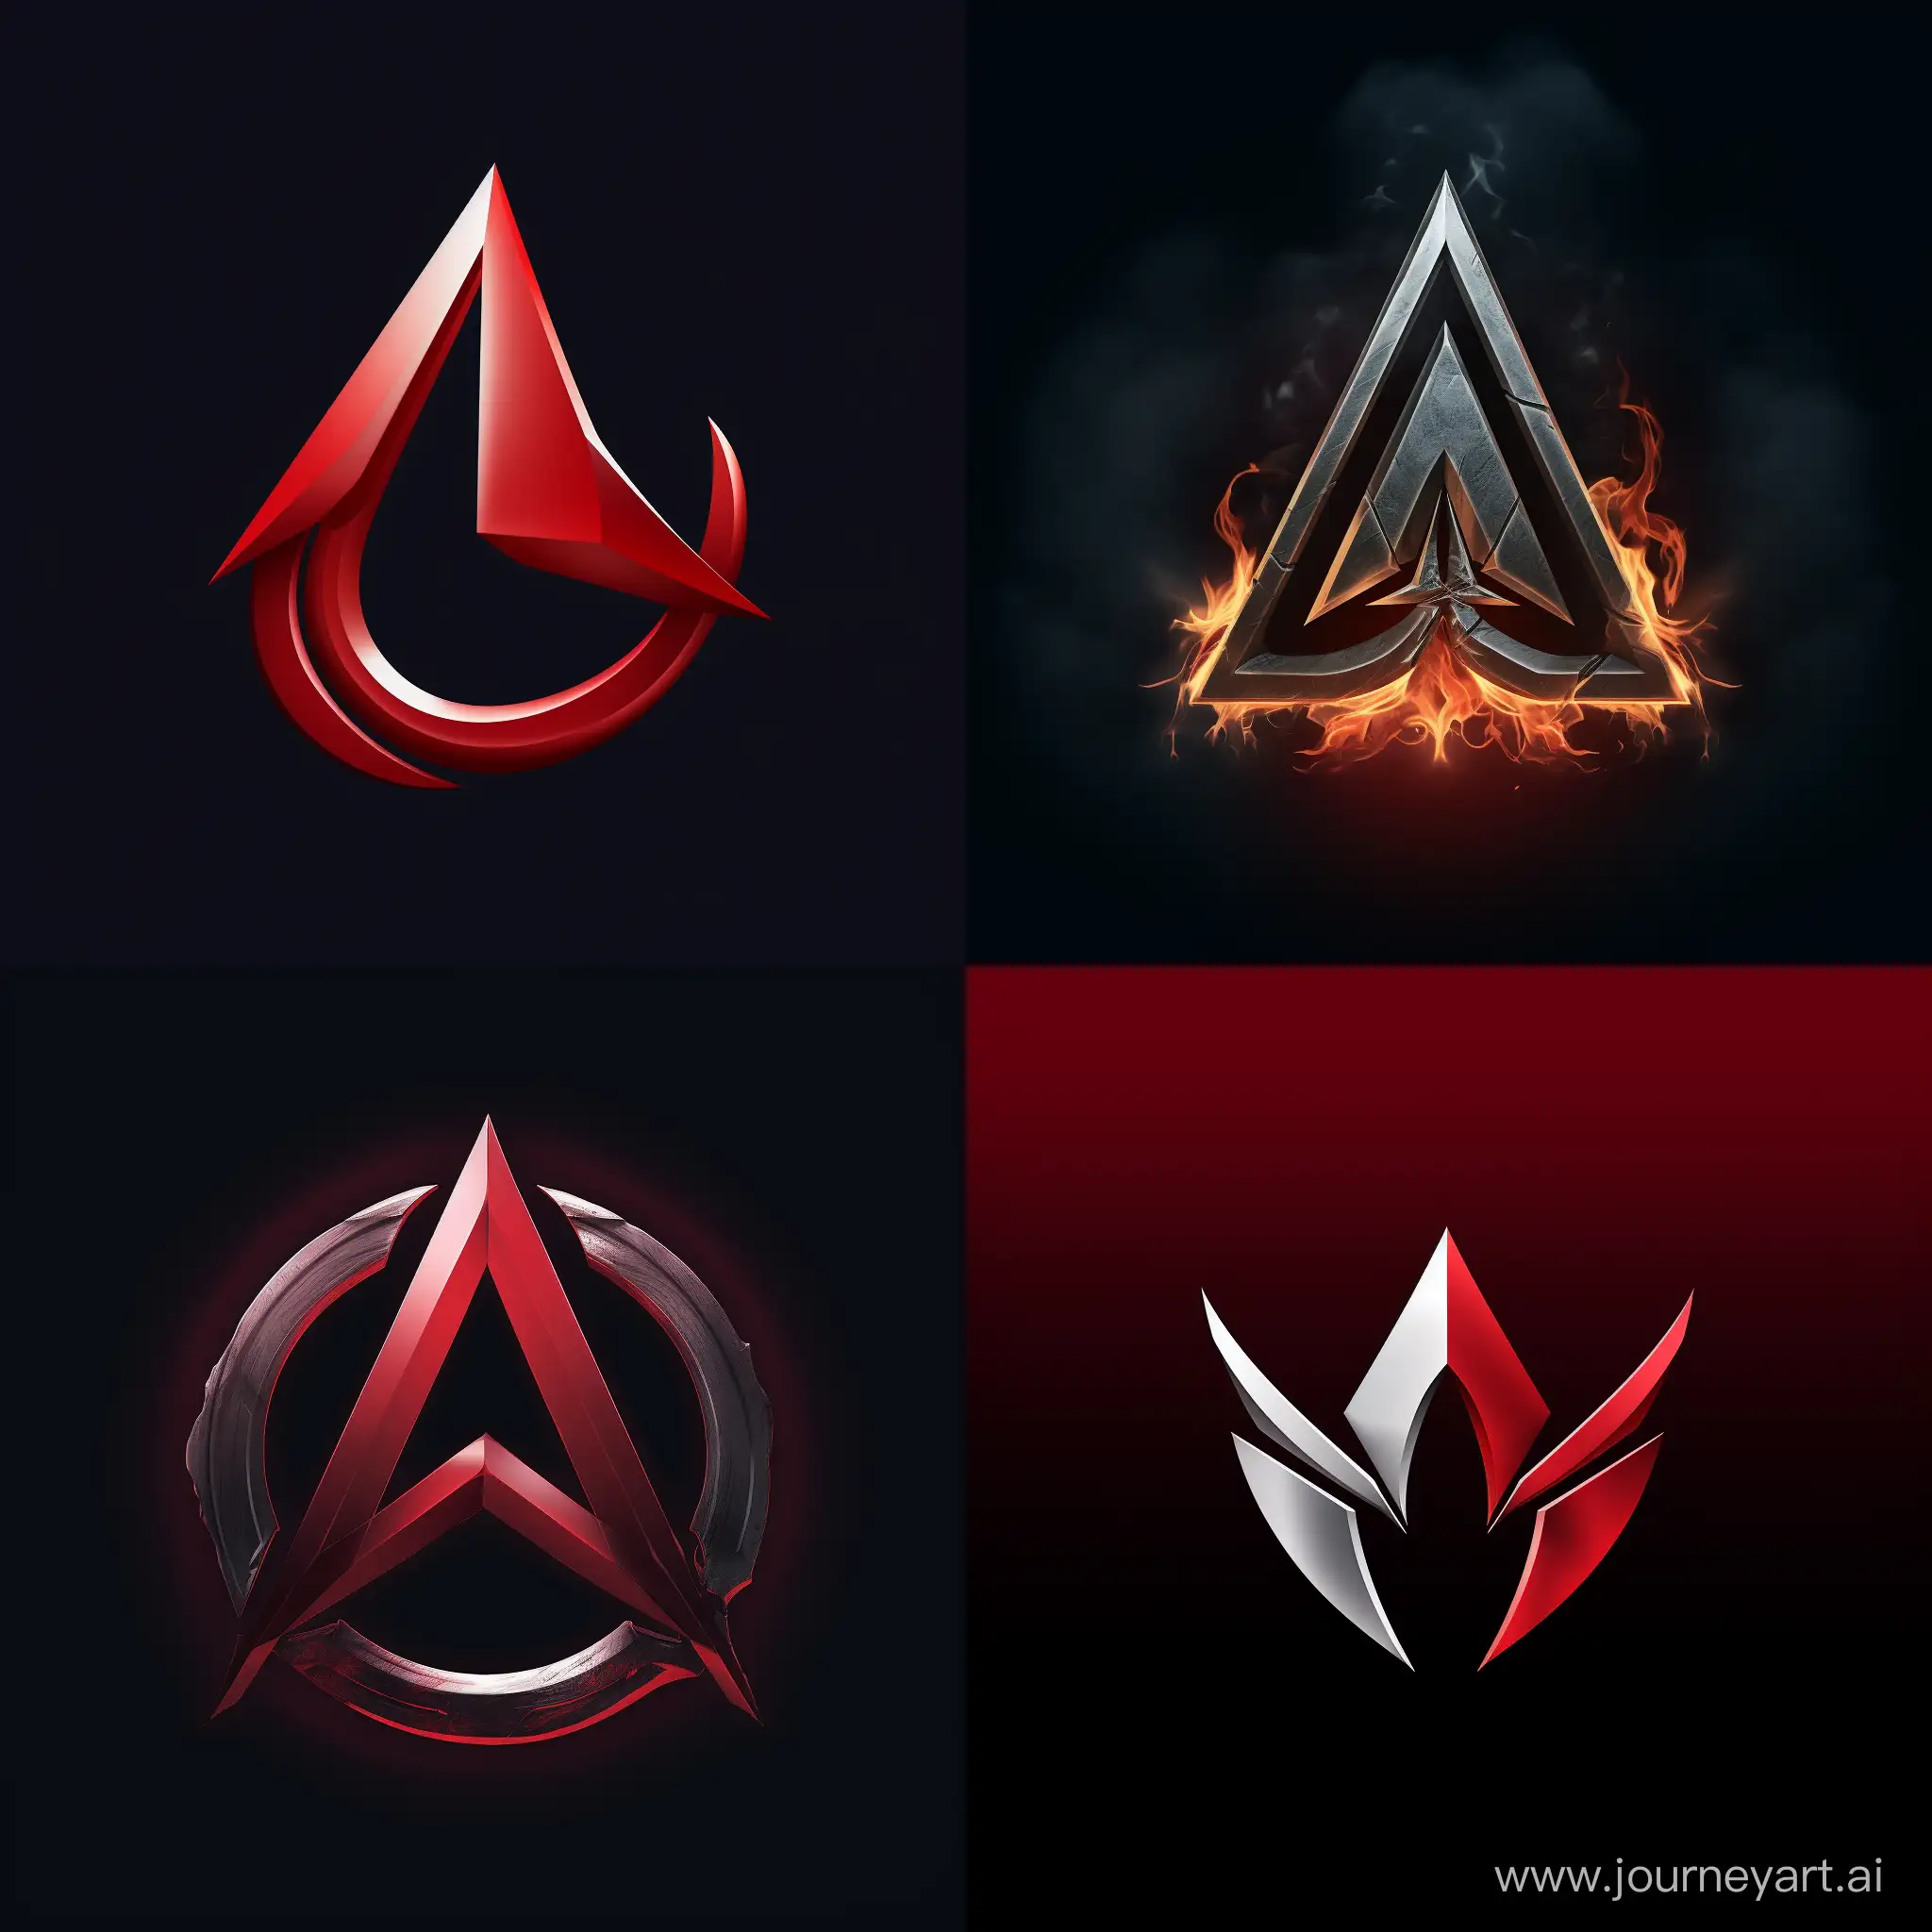 Assassins-Creed-Logo-Recreation-in-Augmented-Reality-AR-Aspect-Ratio-11